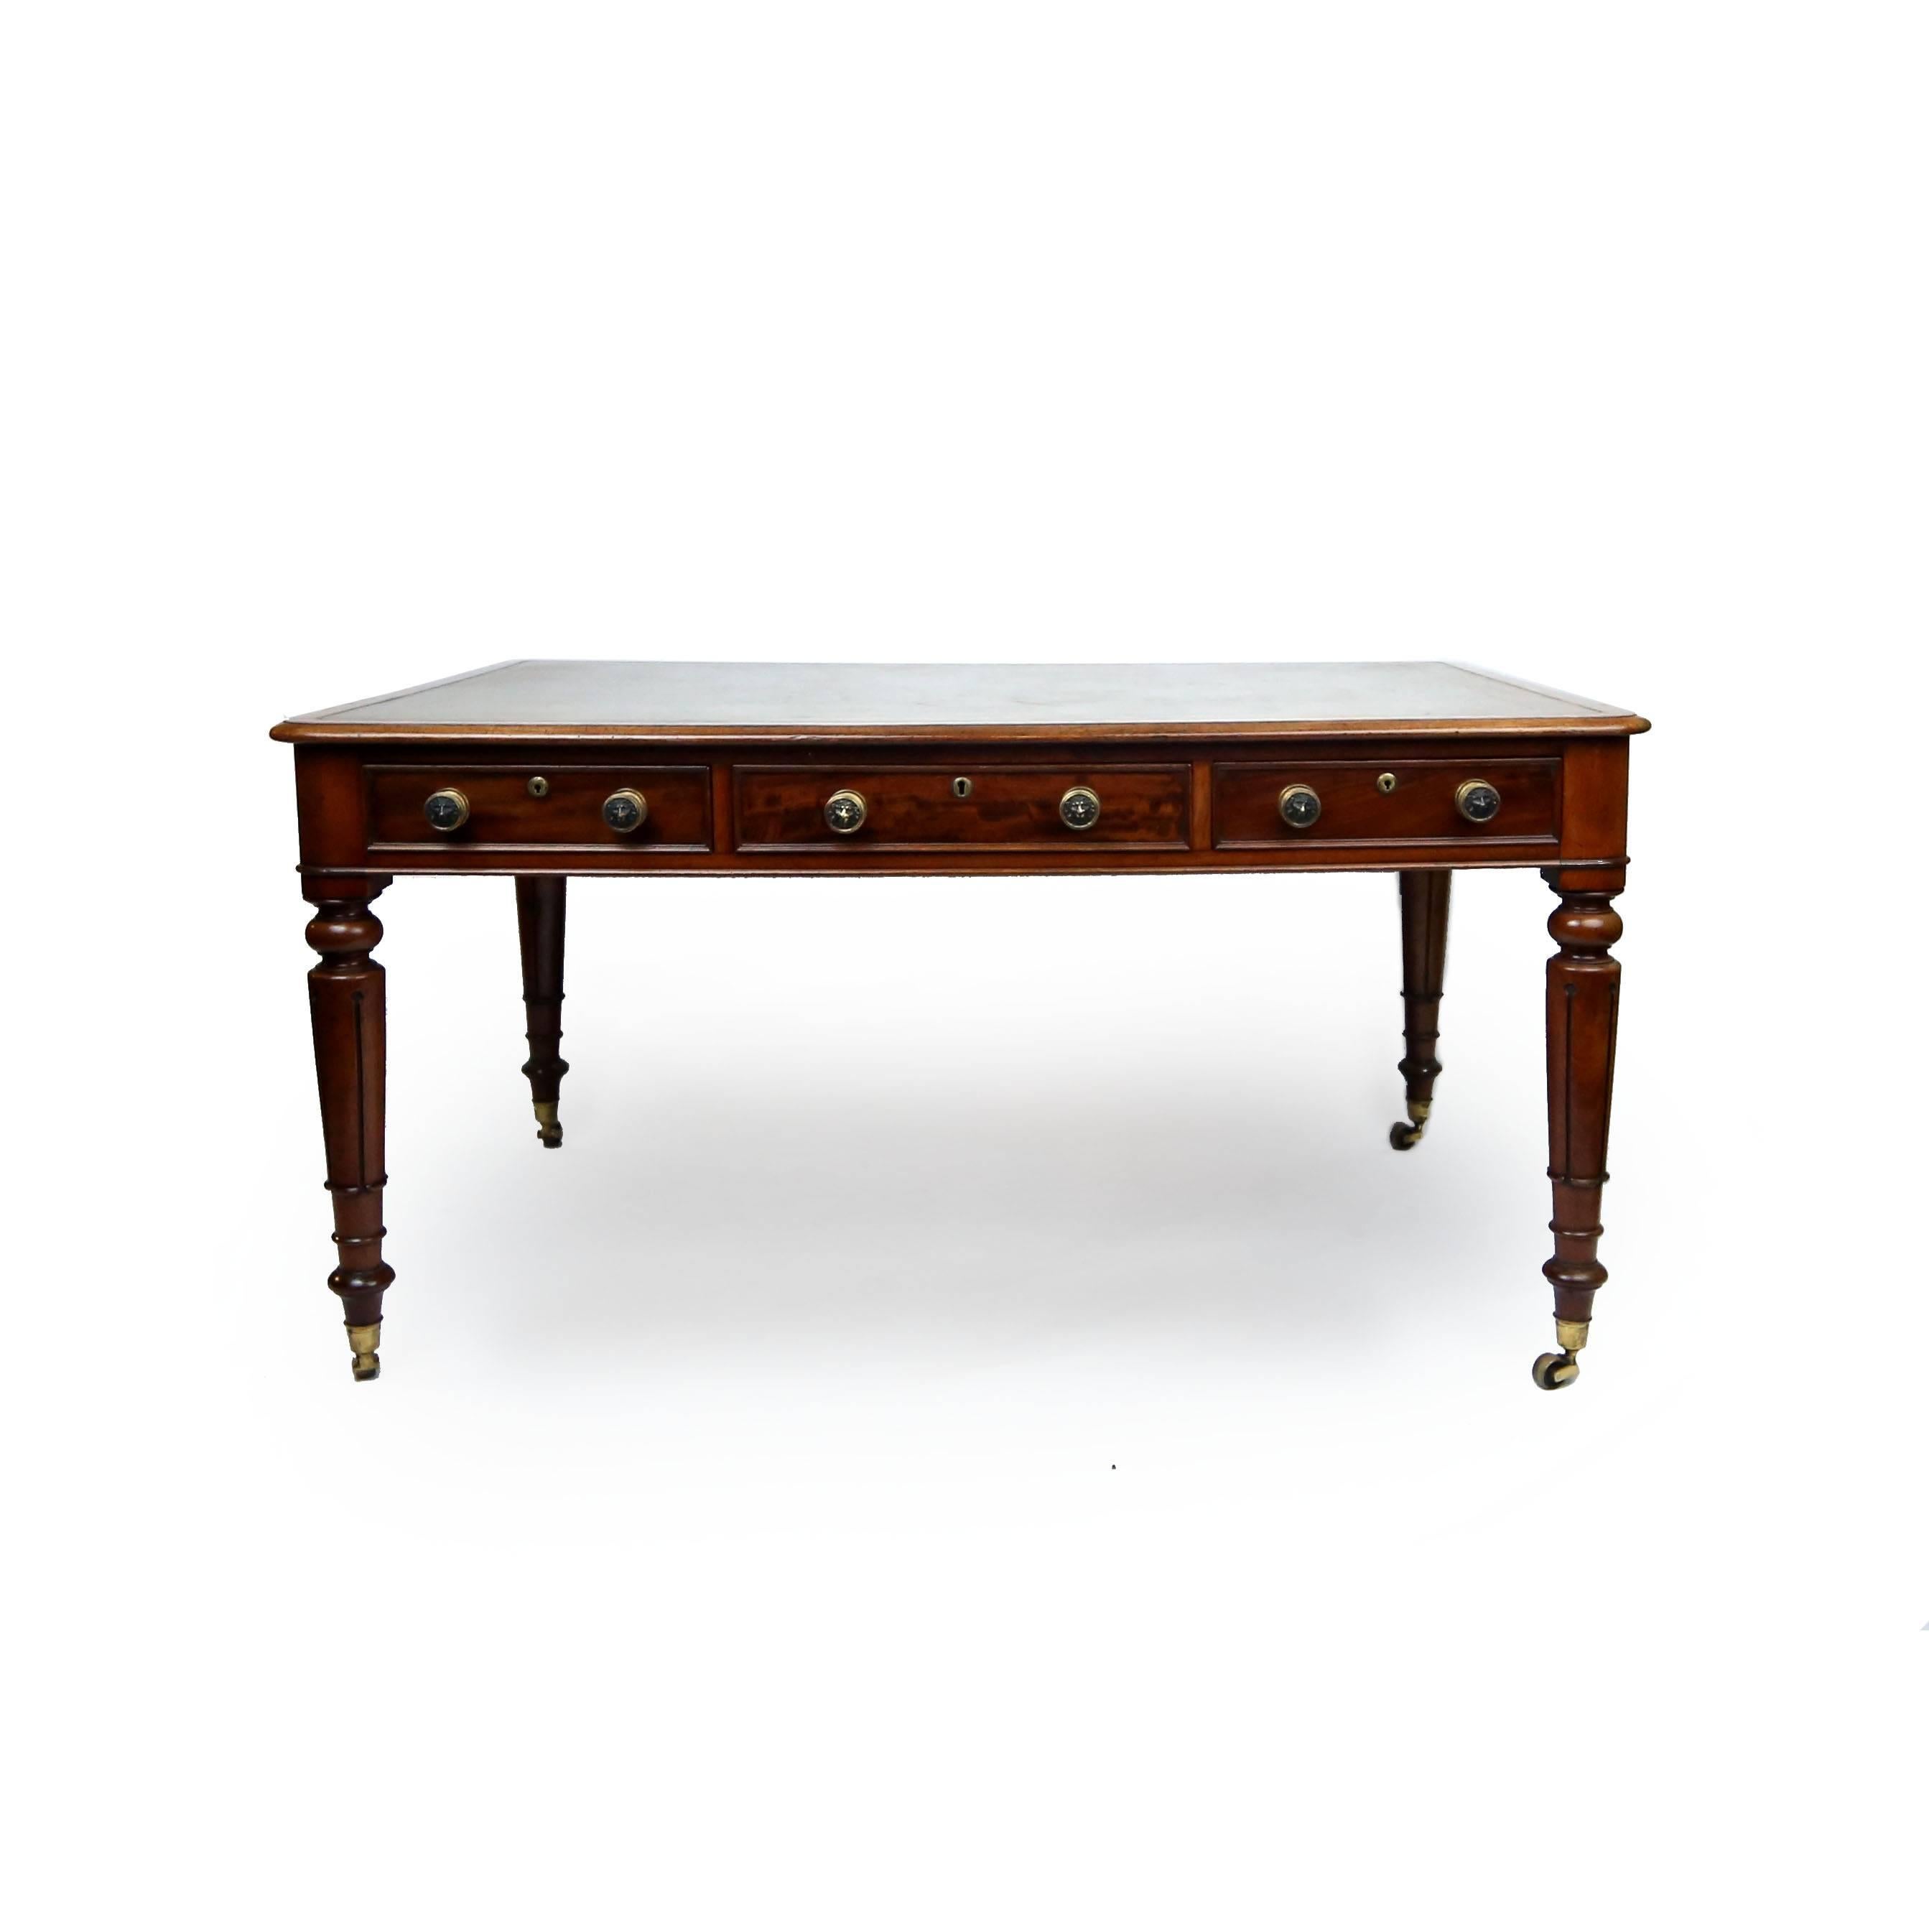 Astounding William IV partners desk in mahogany, with three frieze drawers to each side. Fine original gilt brass lions head pulls and antique olive tooled leather work surface. Turned tapering legs terminating in original castors. Gillows of